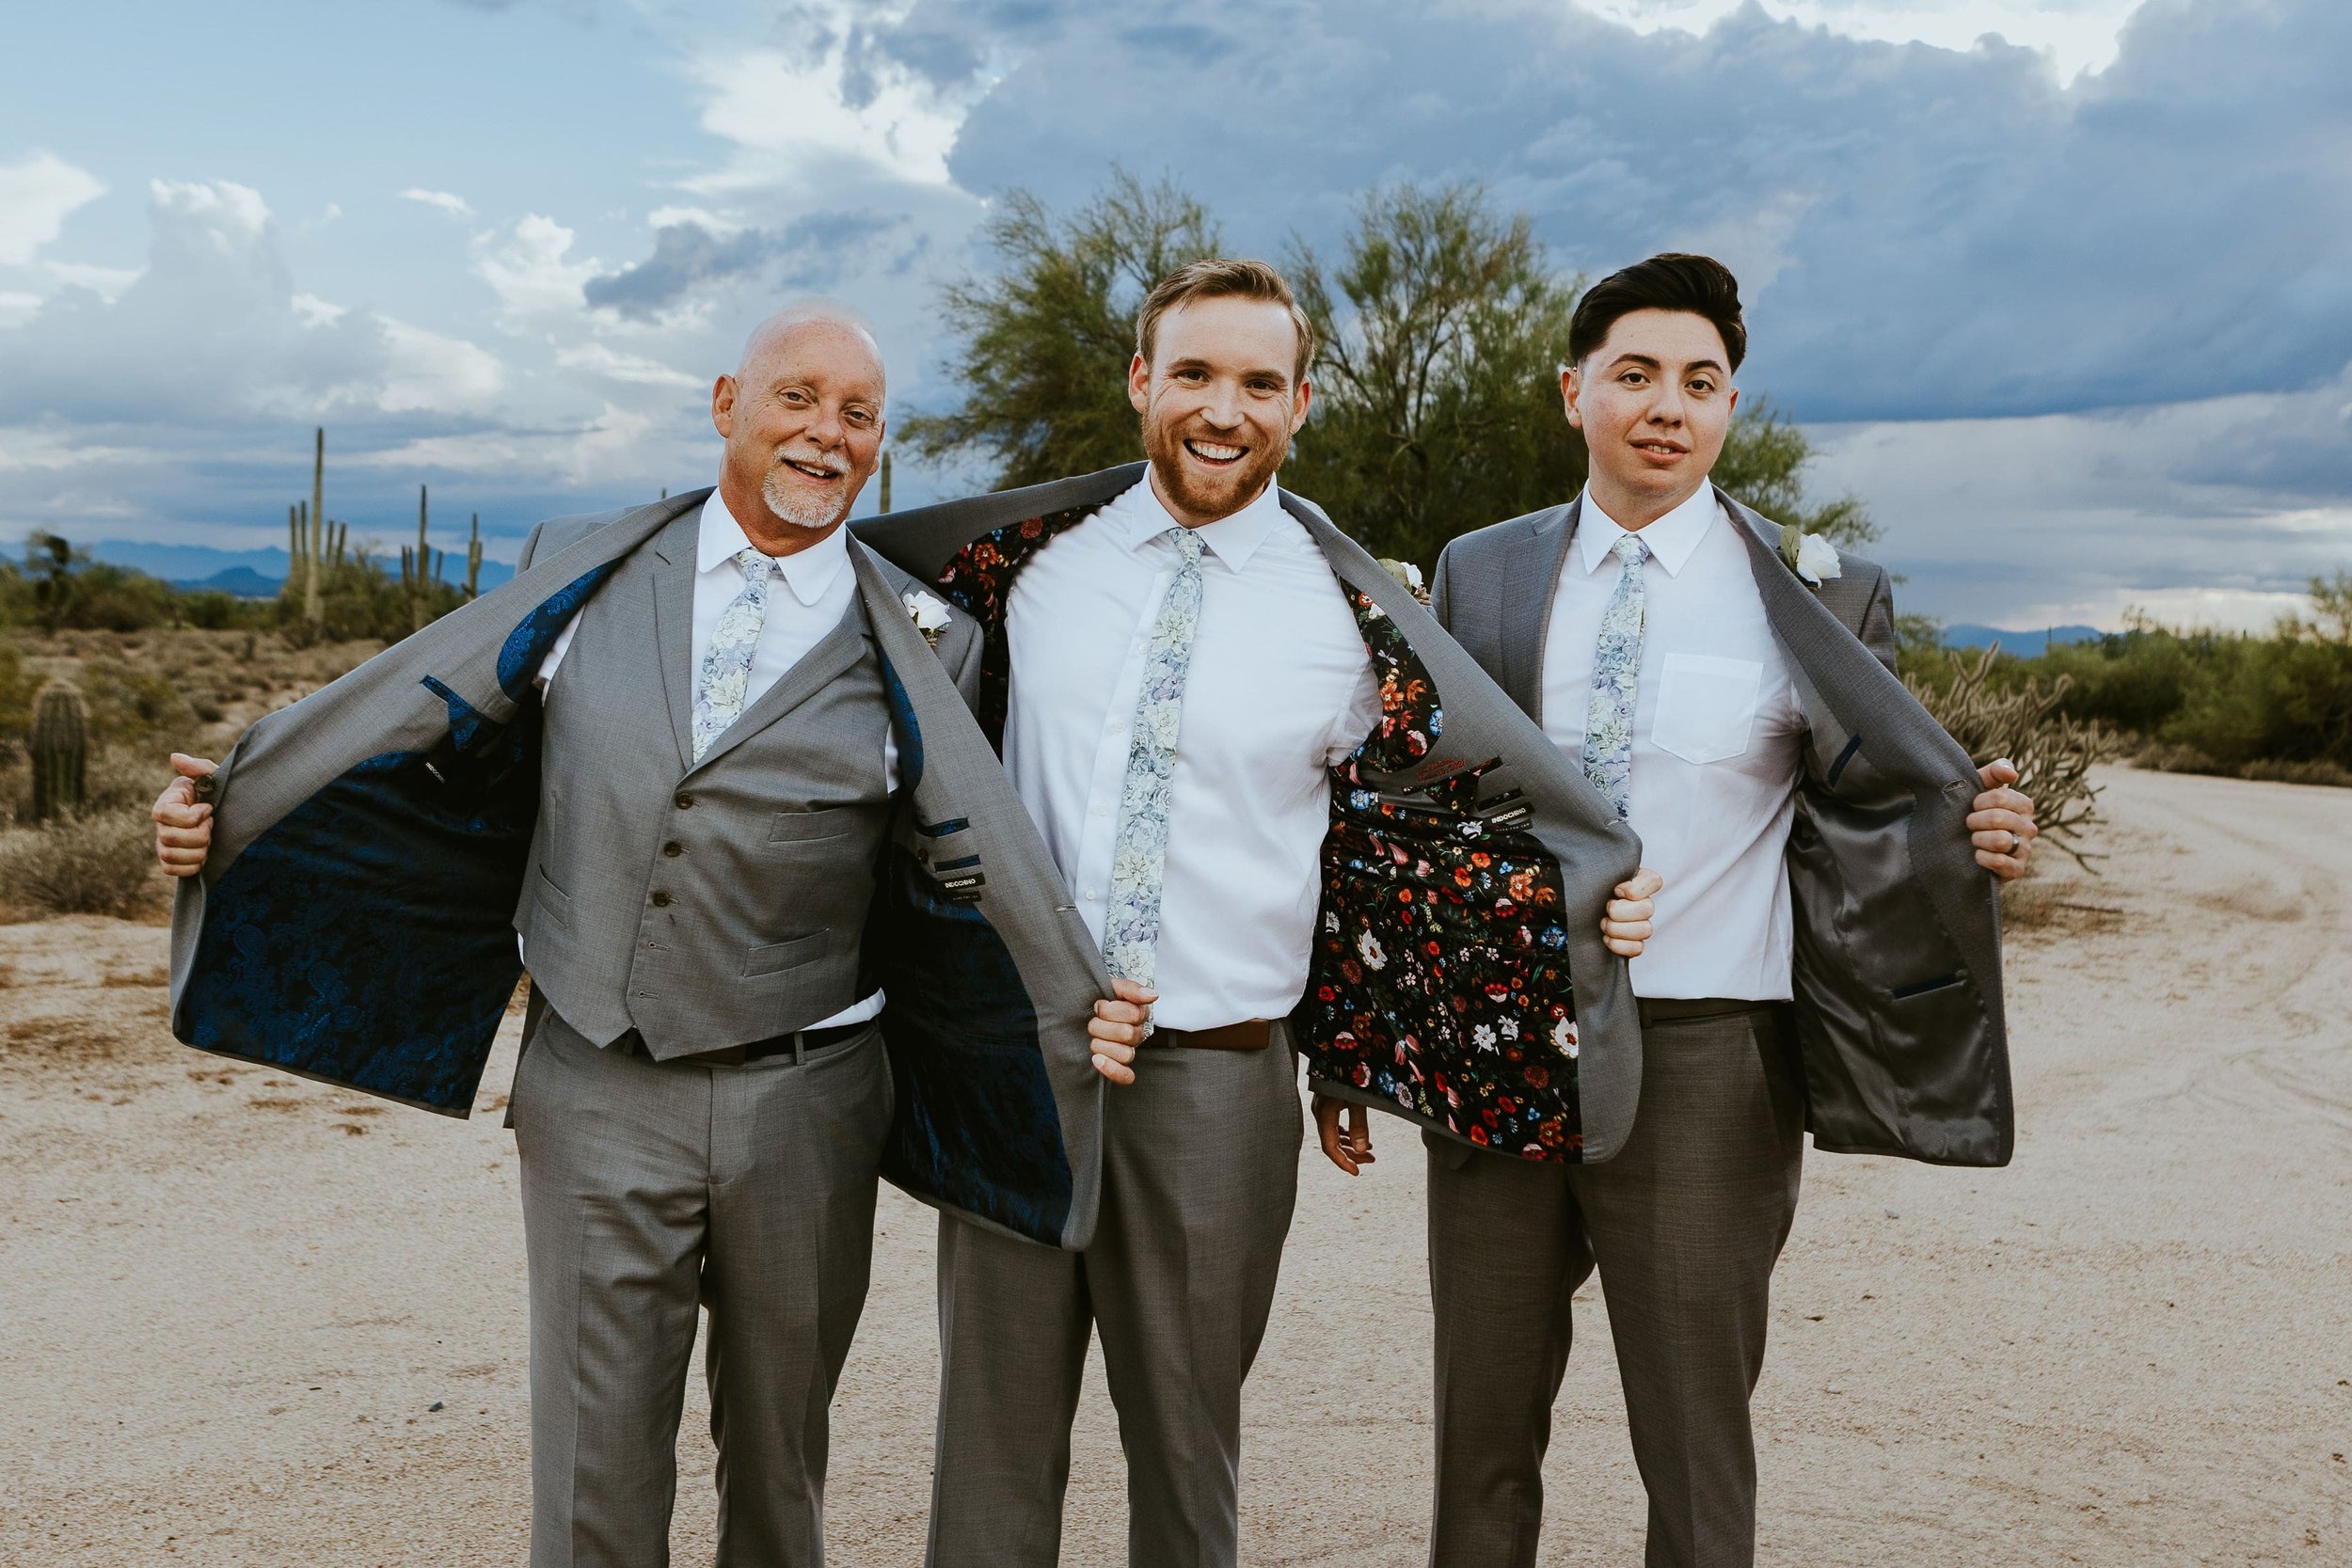 Groom and groomsmen in gray suits with white shirts and blue floral ties